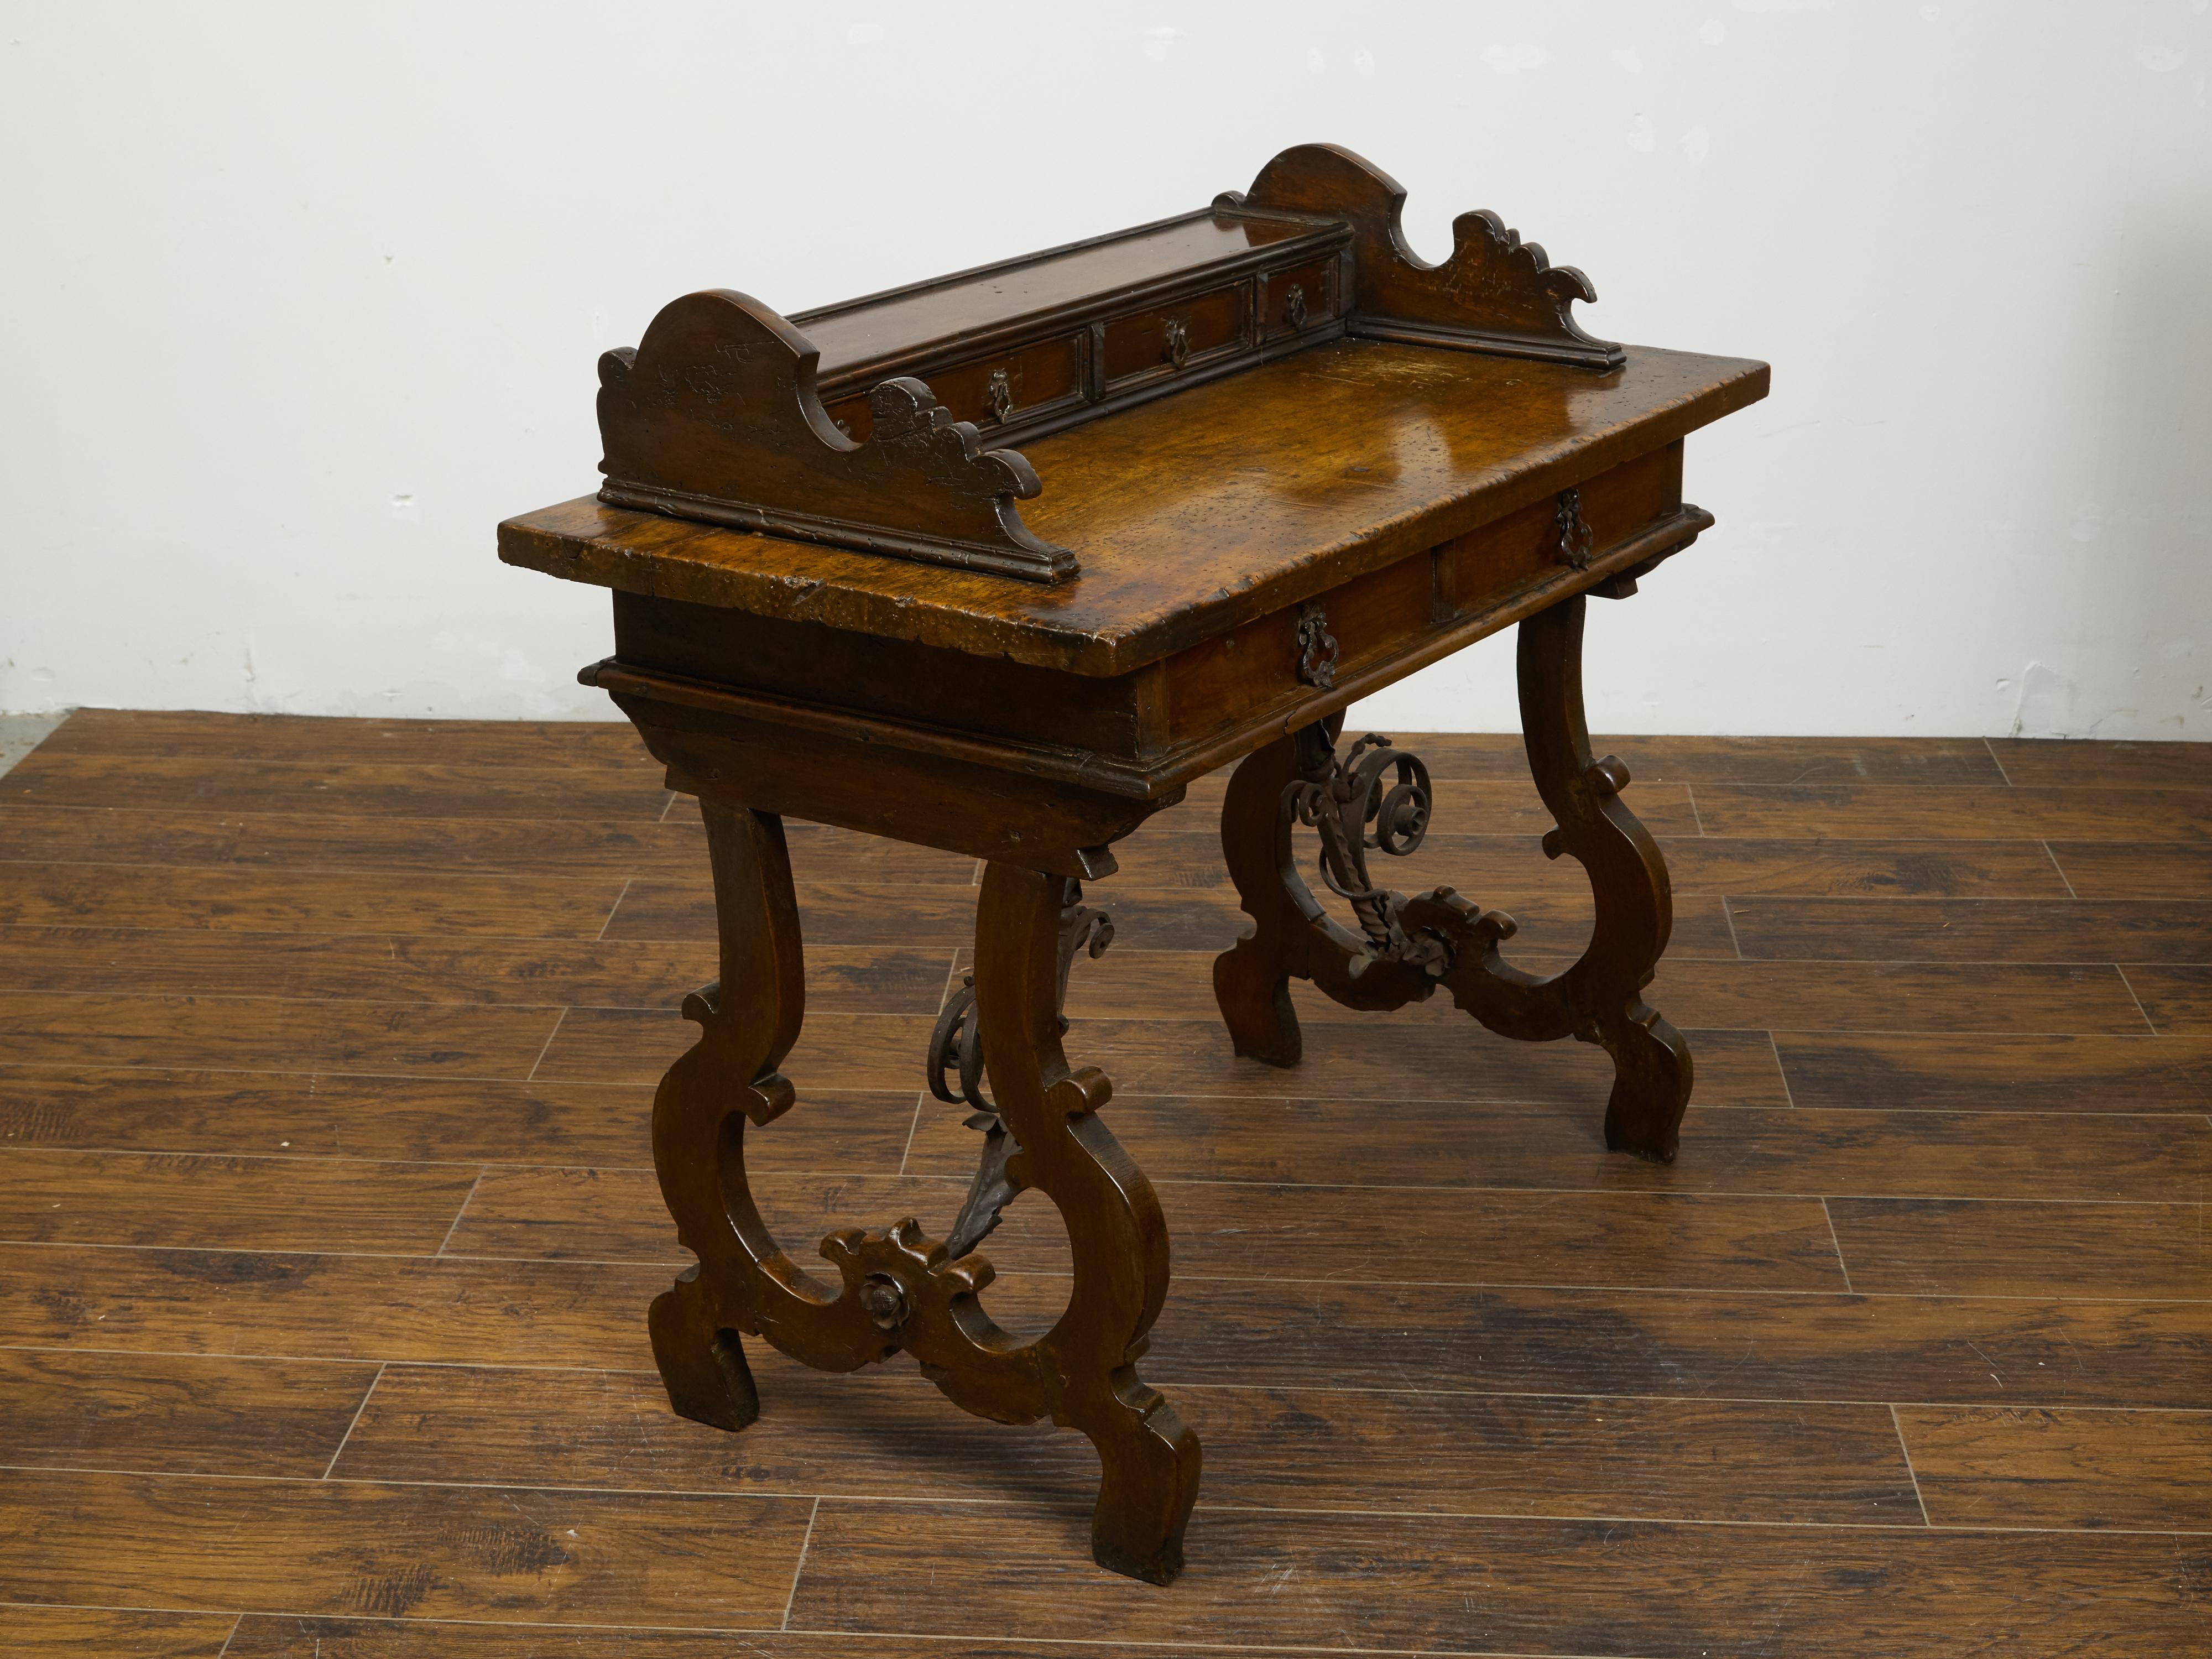 An Italian Baroque style walnut Desk/table from the early 19th century, with drawers, lyre shaped base and wrought-iron stretcher. Created in Italy during the early years of the 19th century, this walnut desk/table features a rectangular top